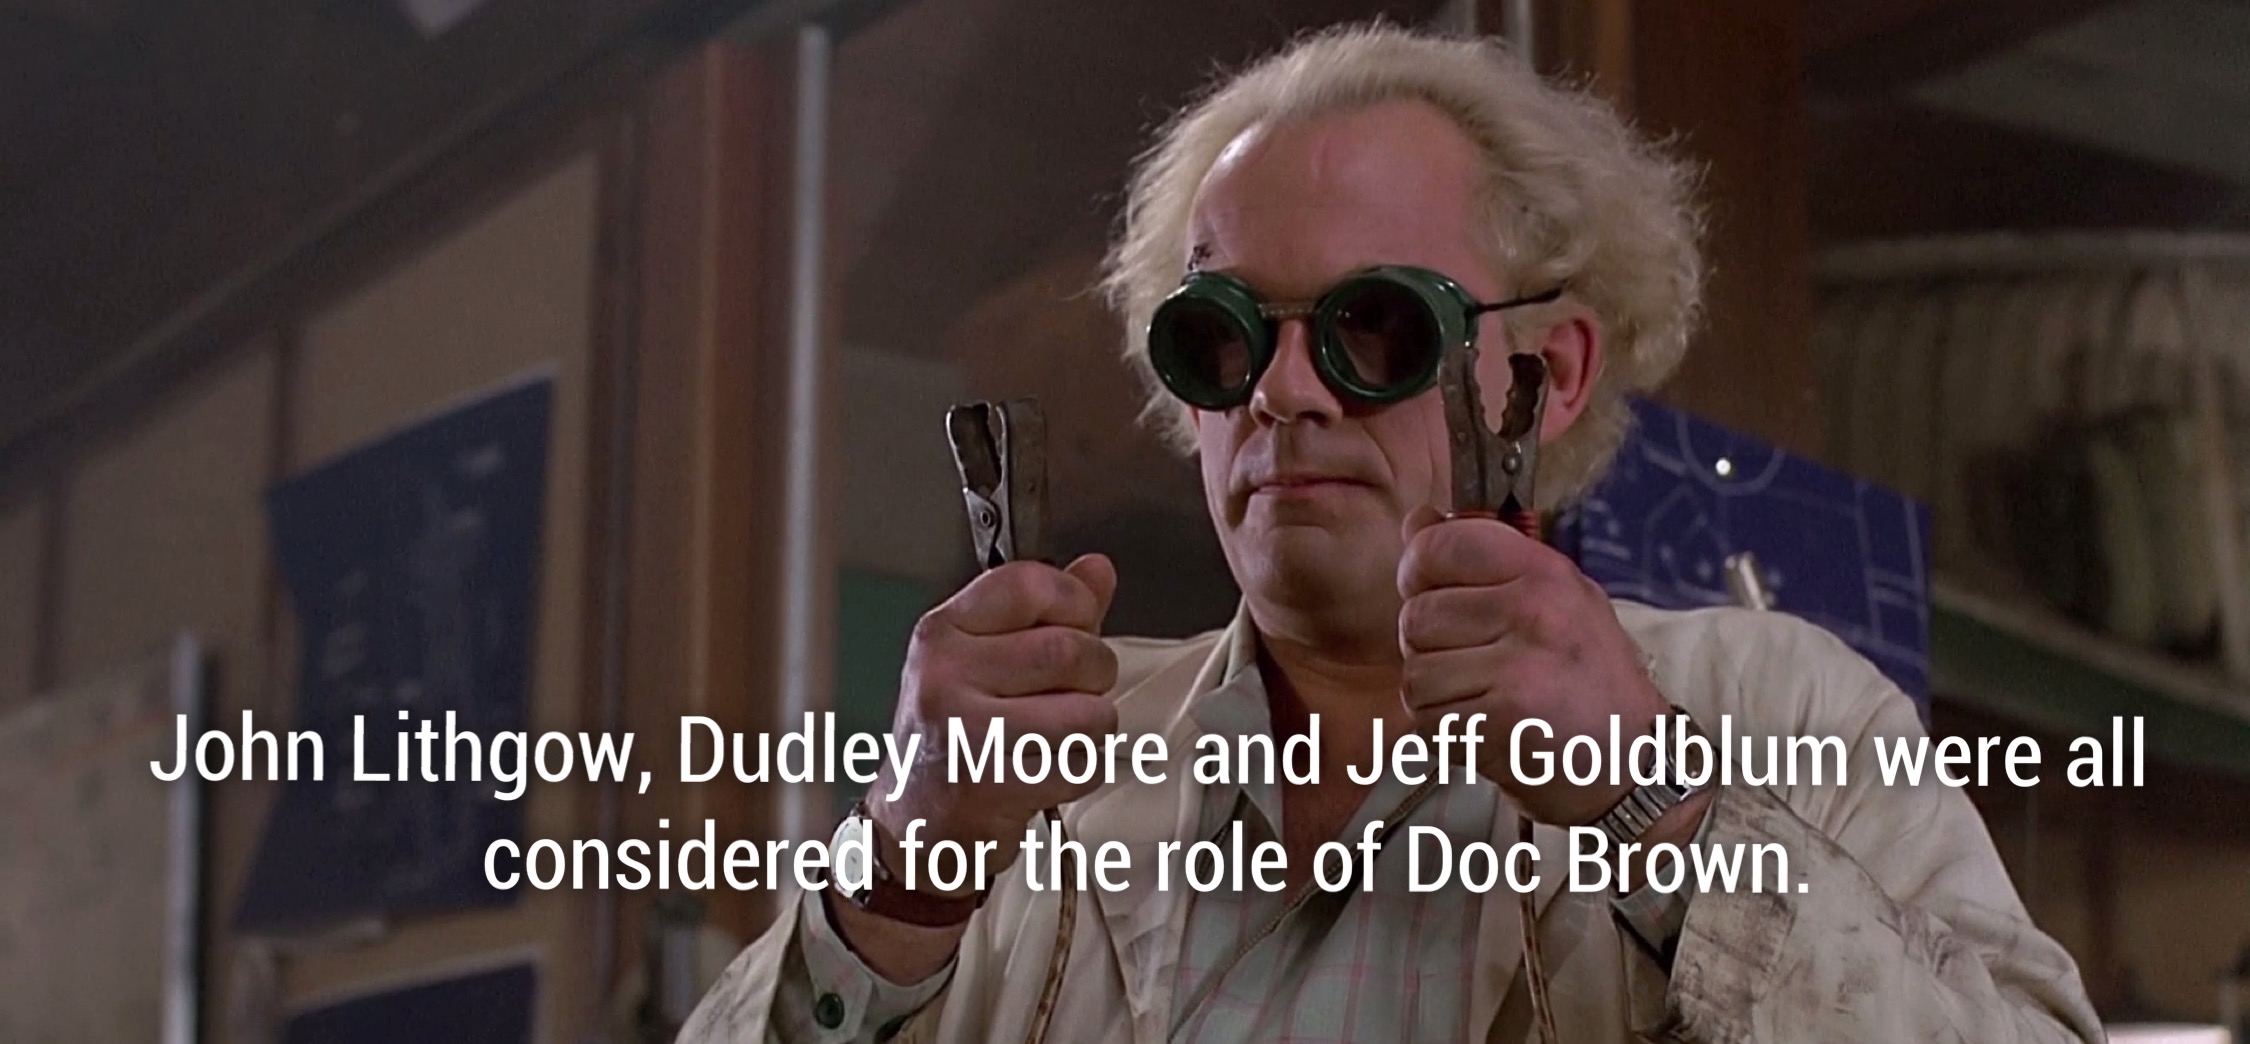 doc from back - John Lithgow, Dudley Moore and Jeff Goldblum were all considered for the role of Doc Brown.